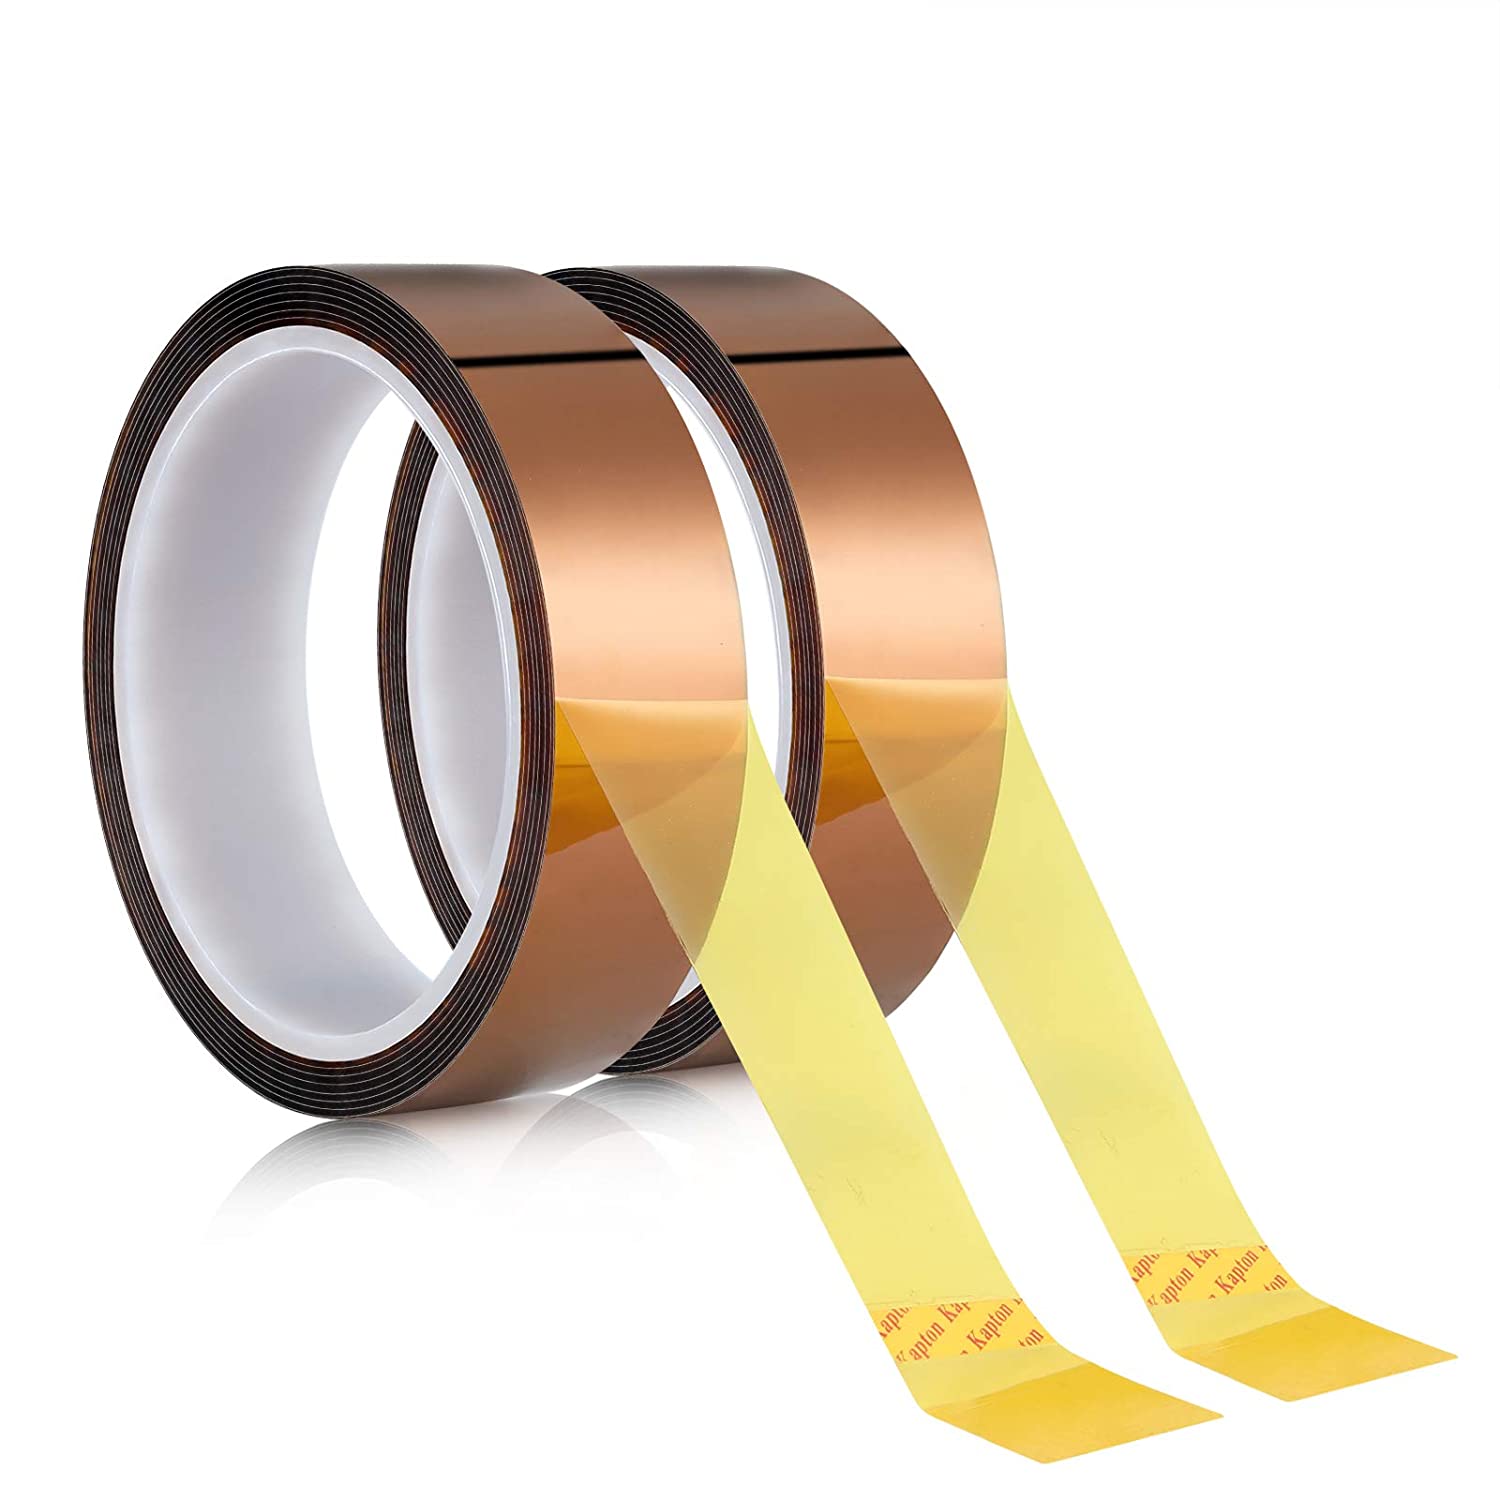 HE Multy-Size 3D Sublimation Kapton Tape Heat Resistance Tape for Heat  Press Transfer Printing High Temperature Polyimide Film Adhesive Tape (12mm  X